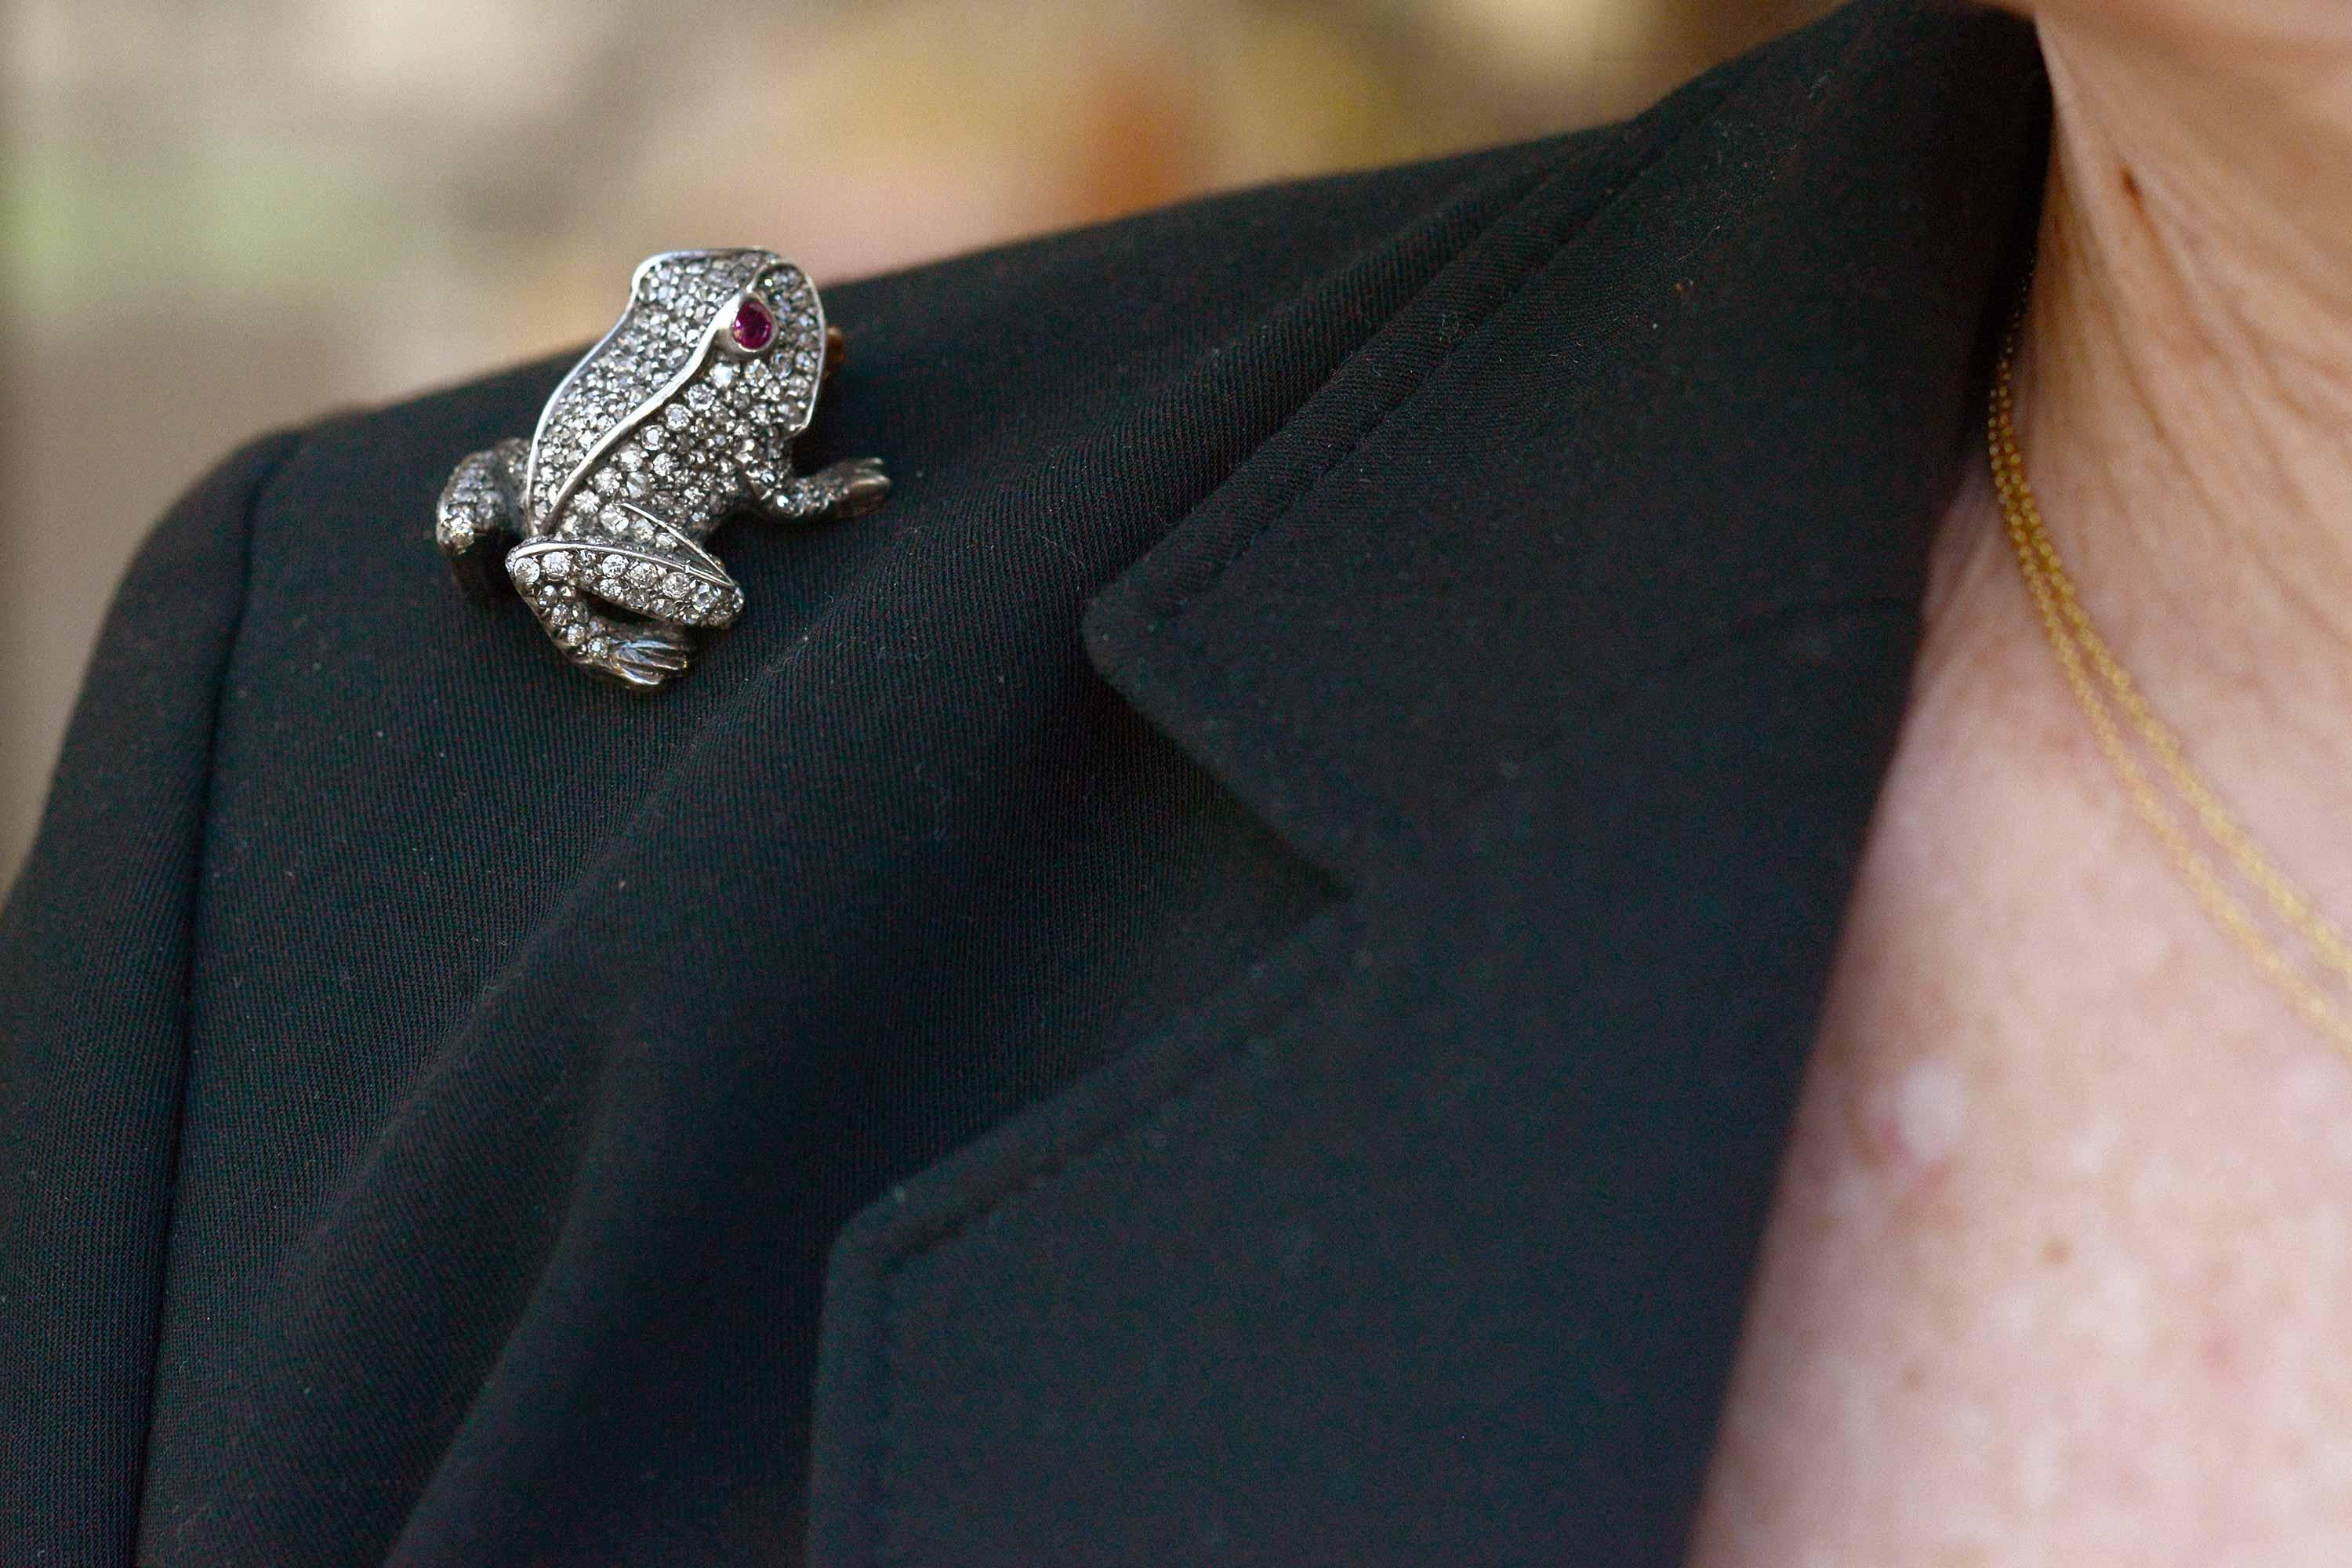 The Louisiana antique diamond frog pin brooch is a fantastic example in the Art Nouveau naturalist style. The pave' setting with numerous old mine, European, Peruzzi and rose cut diamonds together over 2 carats of old world diamonds that glitter and